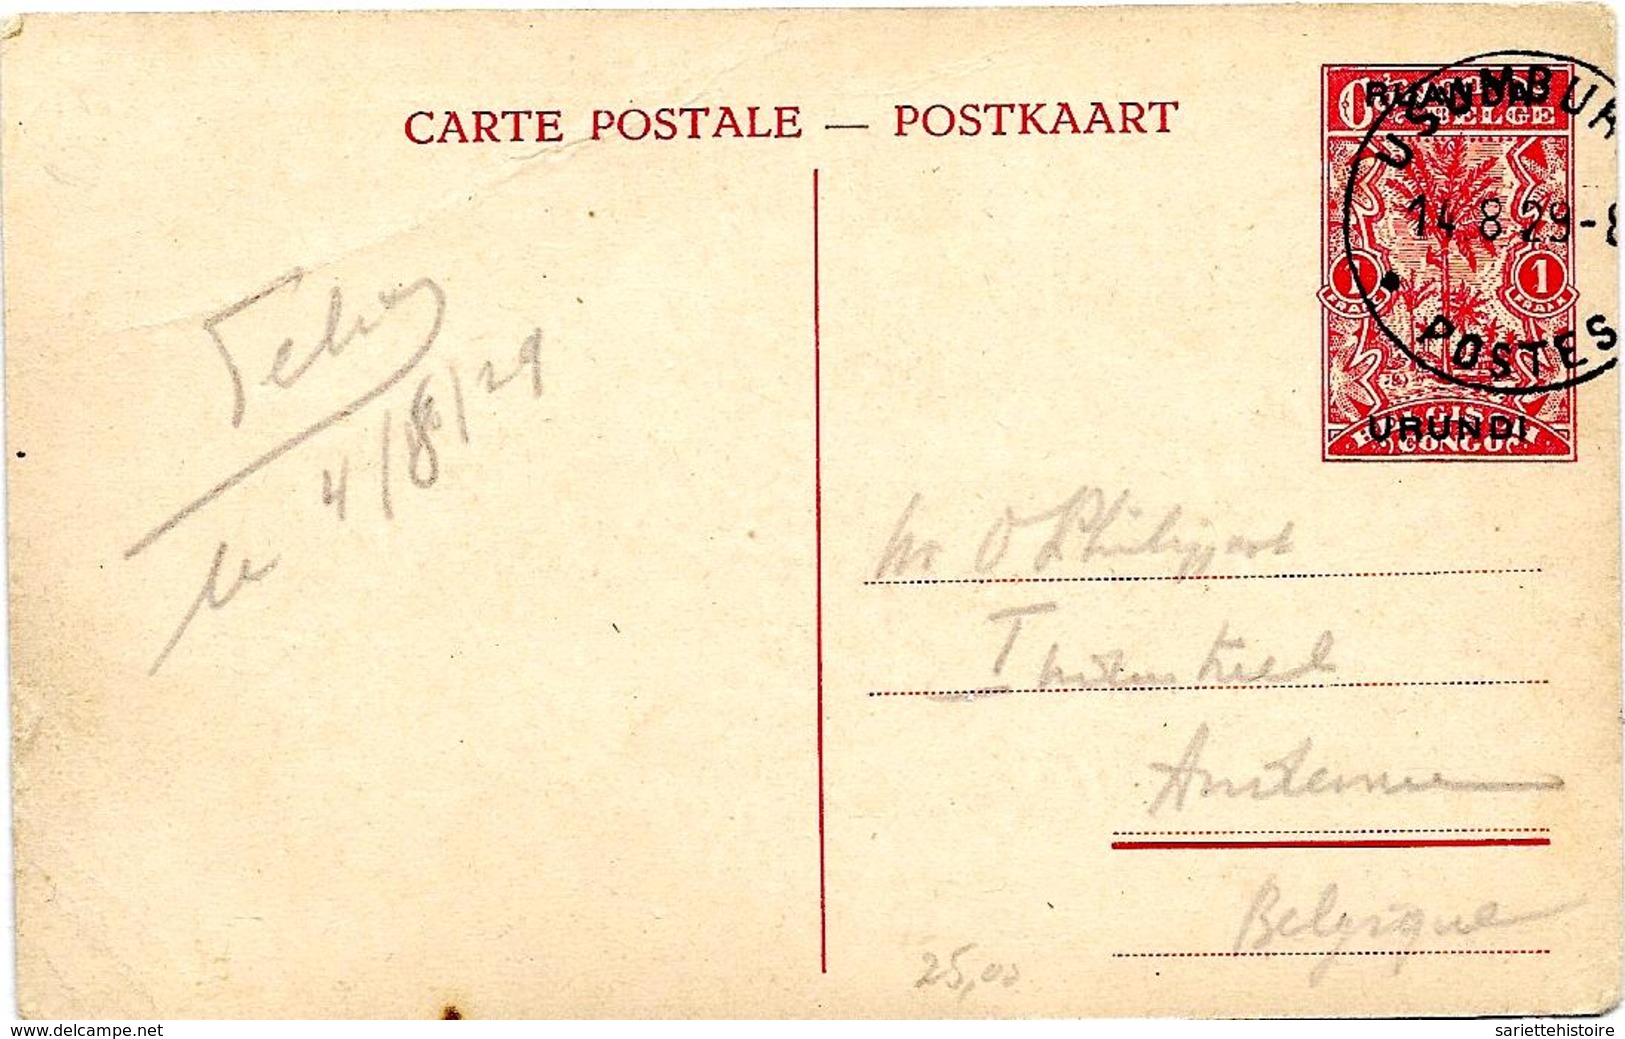 SH 0051. EP 20 / VUE 41 USUMBURA 14.8.29 Vers Andenne. TP - Stamped Stationery